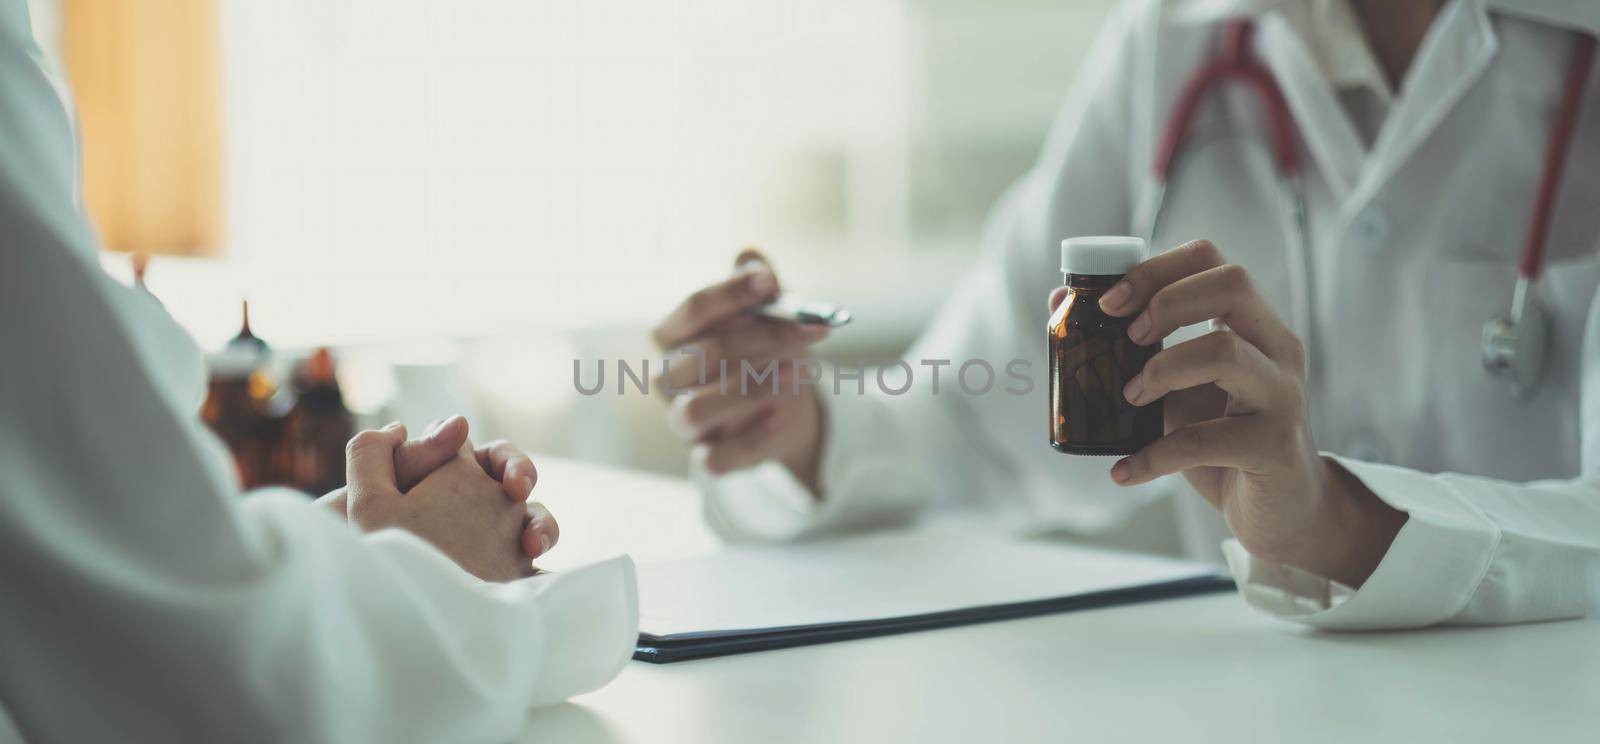 The doctor and the patient talked about something while sitting at the table. A doctor holds a bottle of medicine explaining in detail the kind of medicine. by wichayada